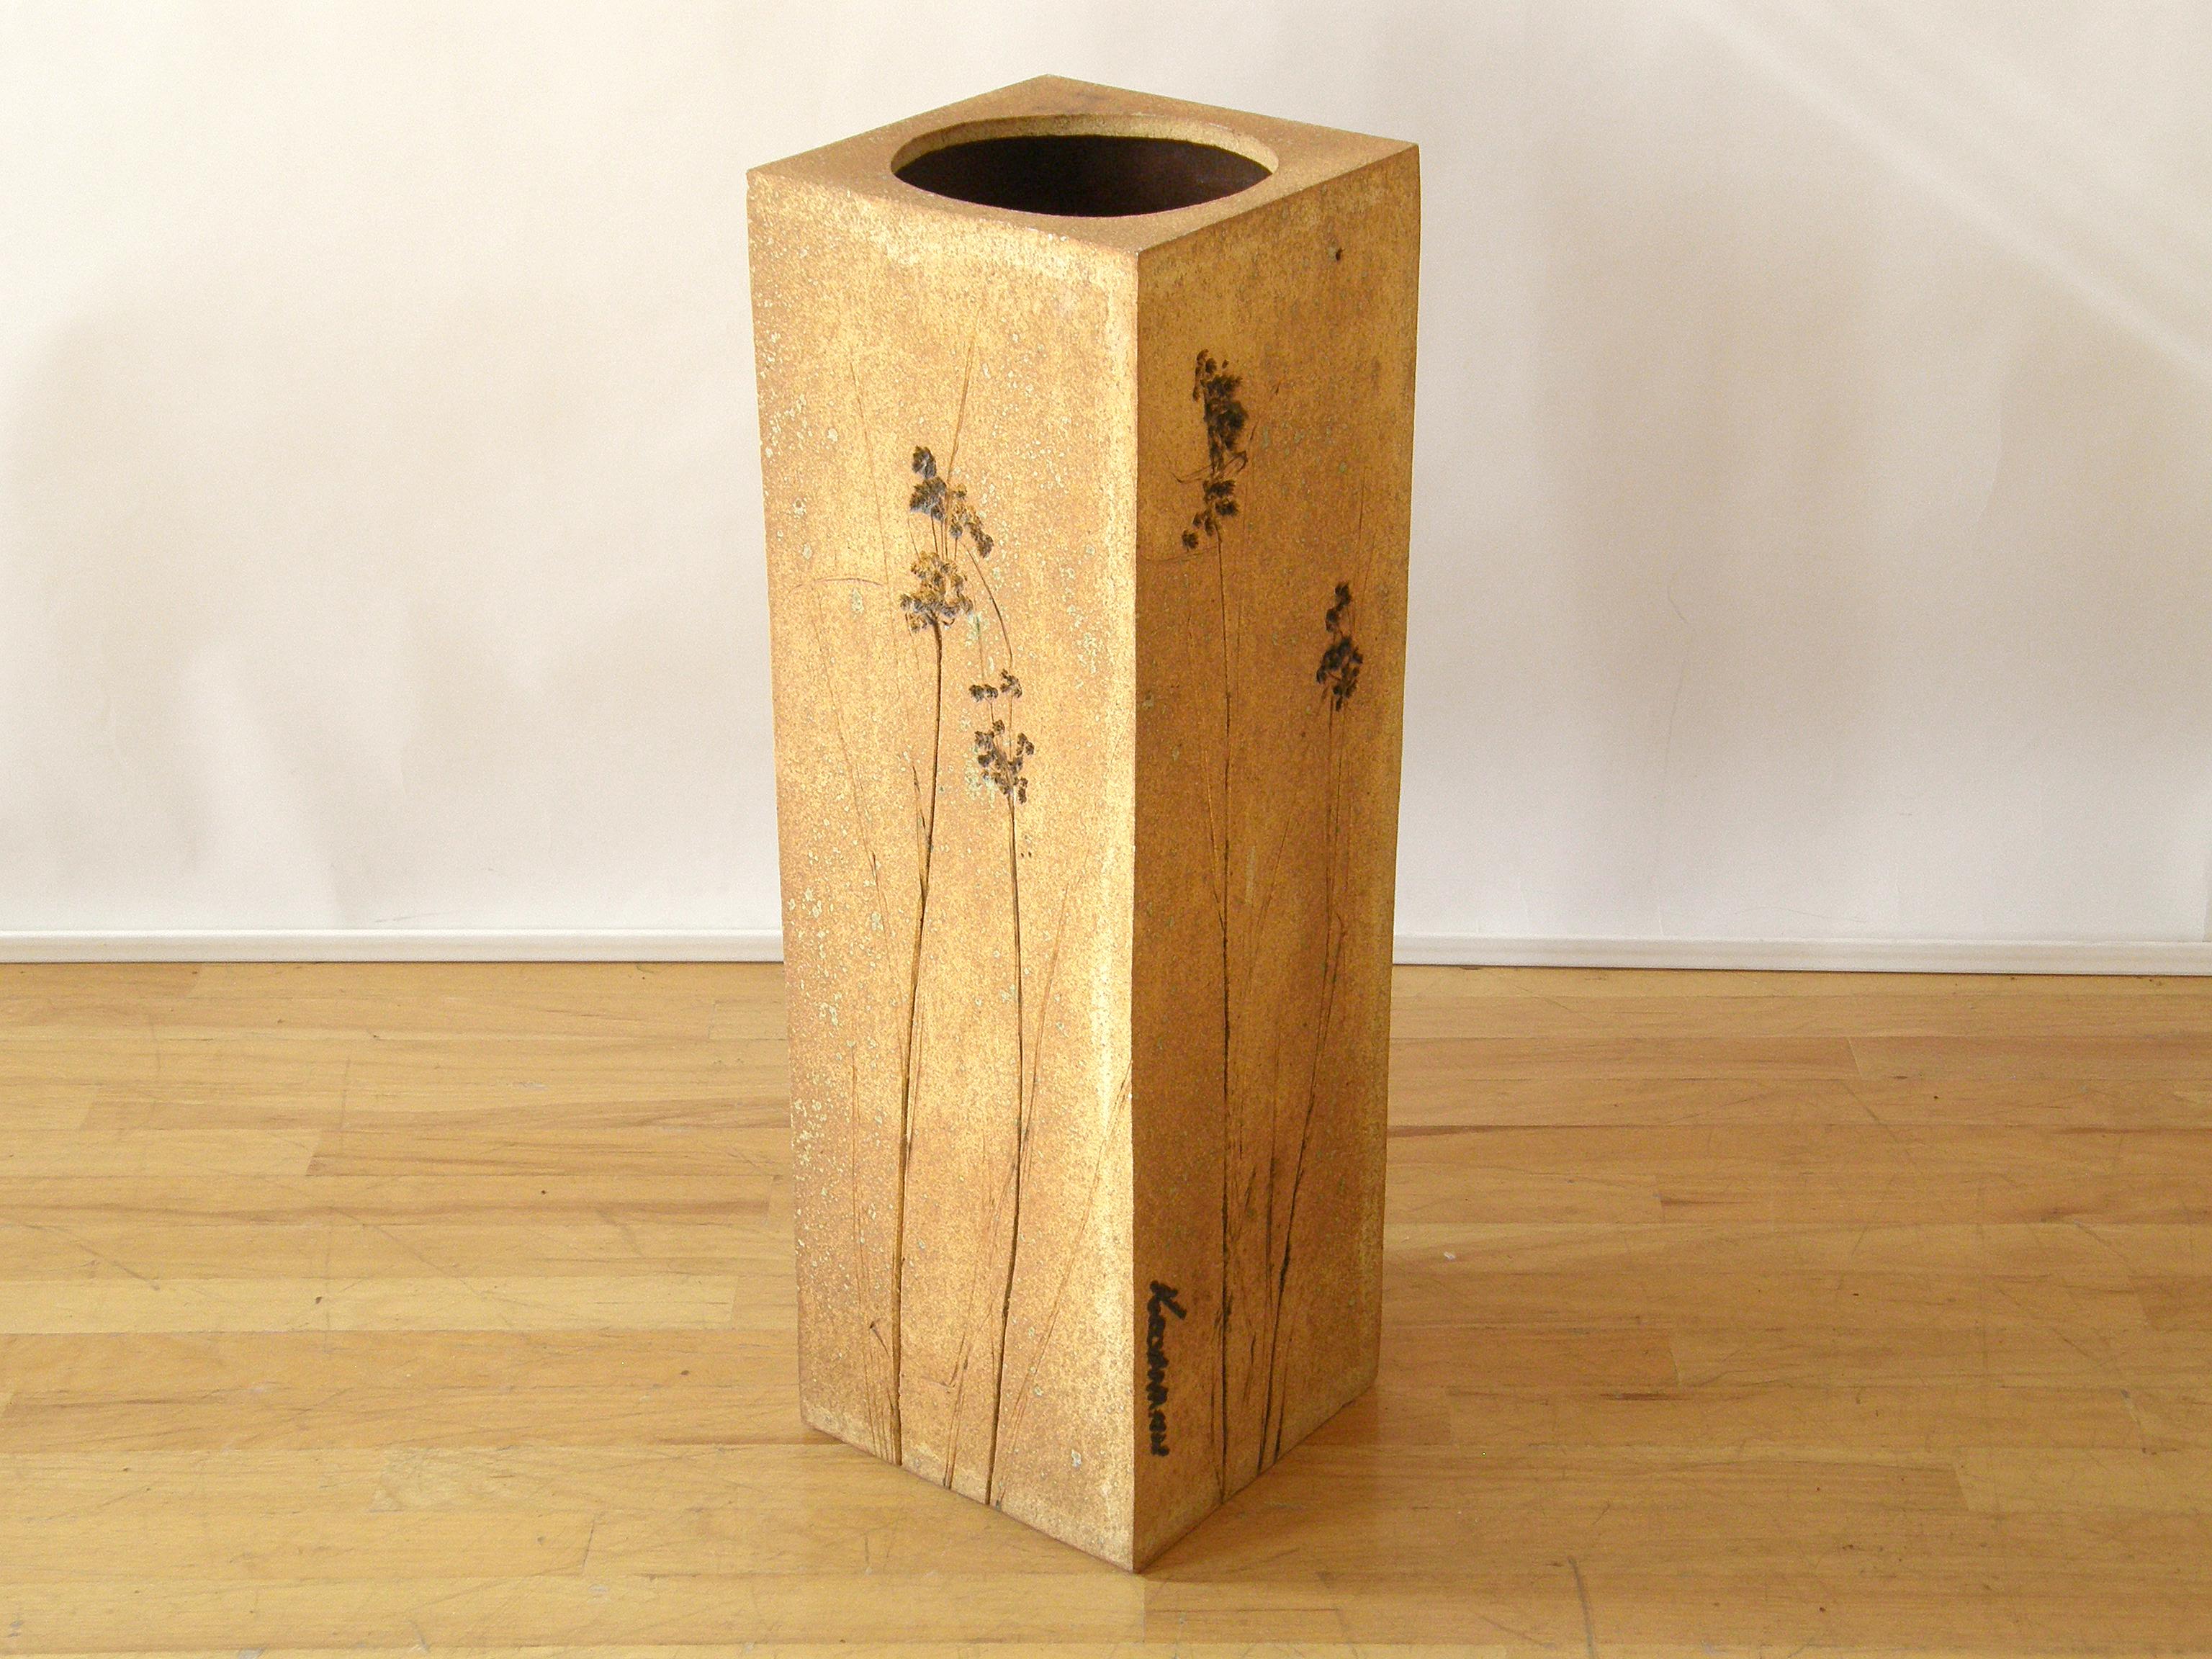 This two-piece floral ceramic piece by Indiana artist Dennis Kirchmann is convertible. It can be used as a pedestal with a small amount of storage with the top on, or the top can be removed to allow access to the recessed area to hold a potted